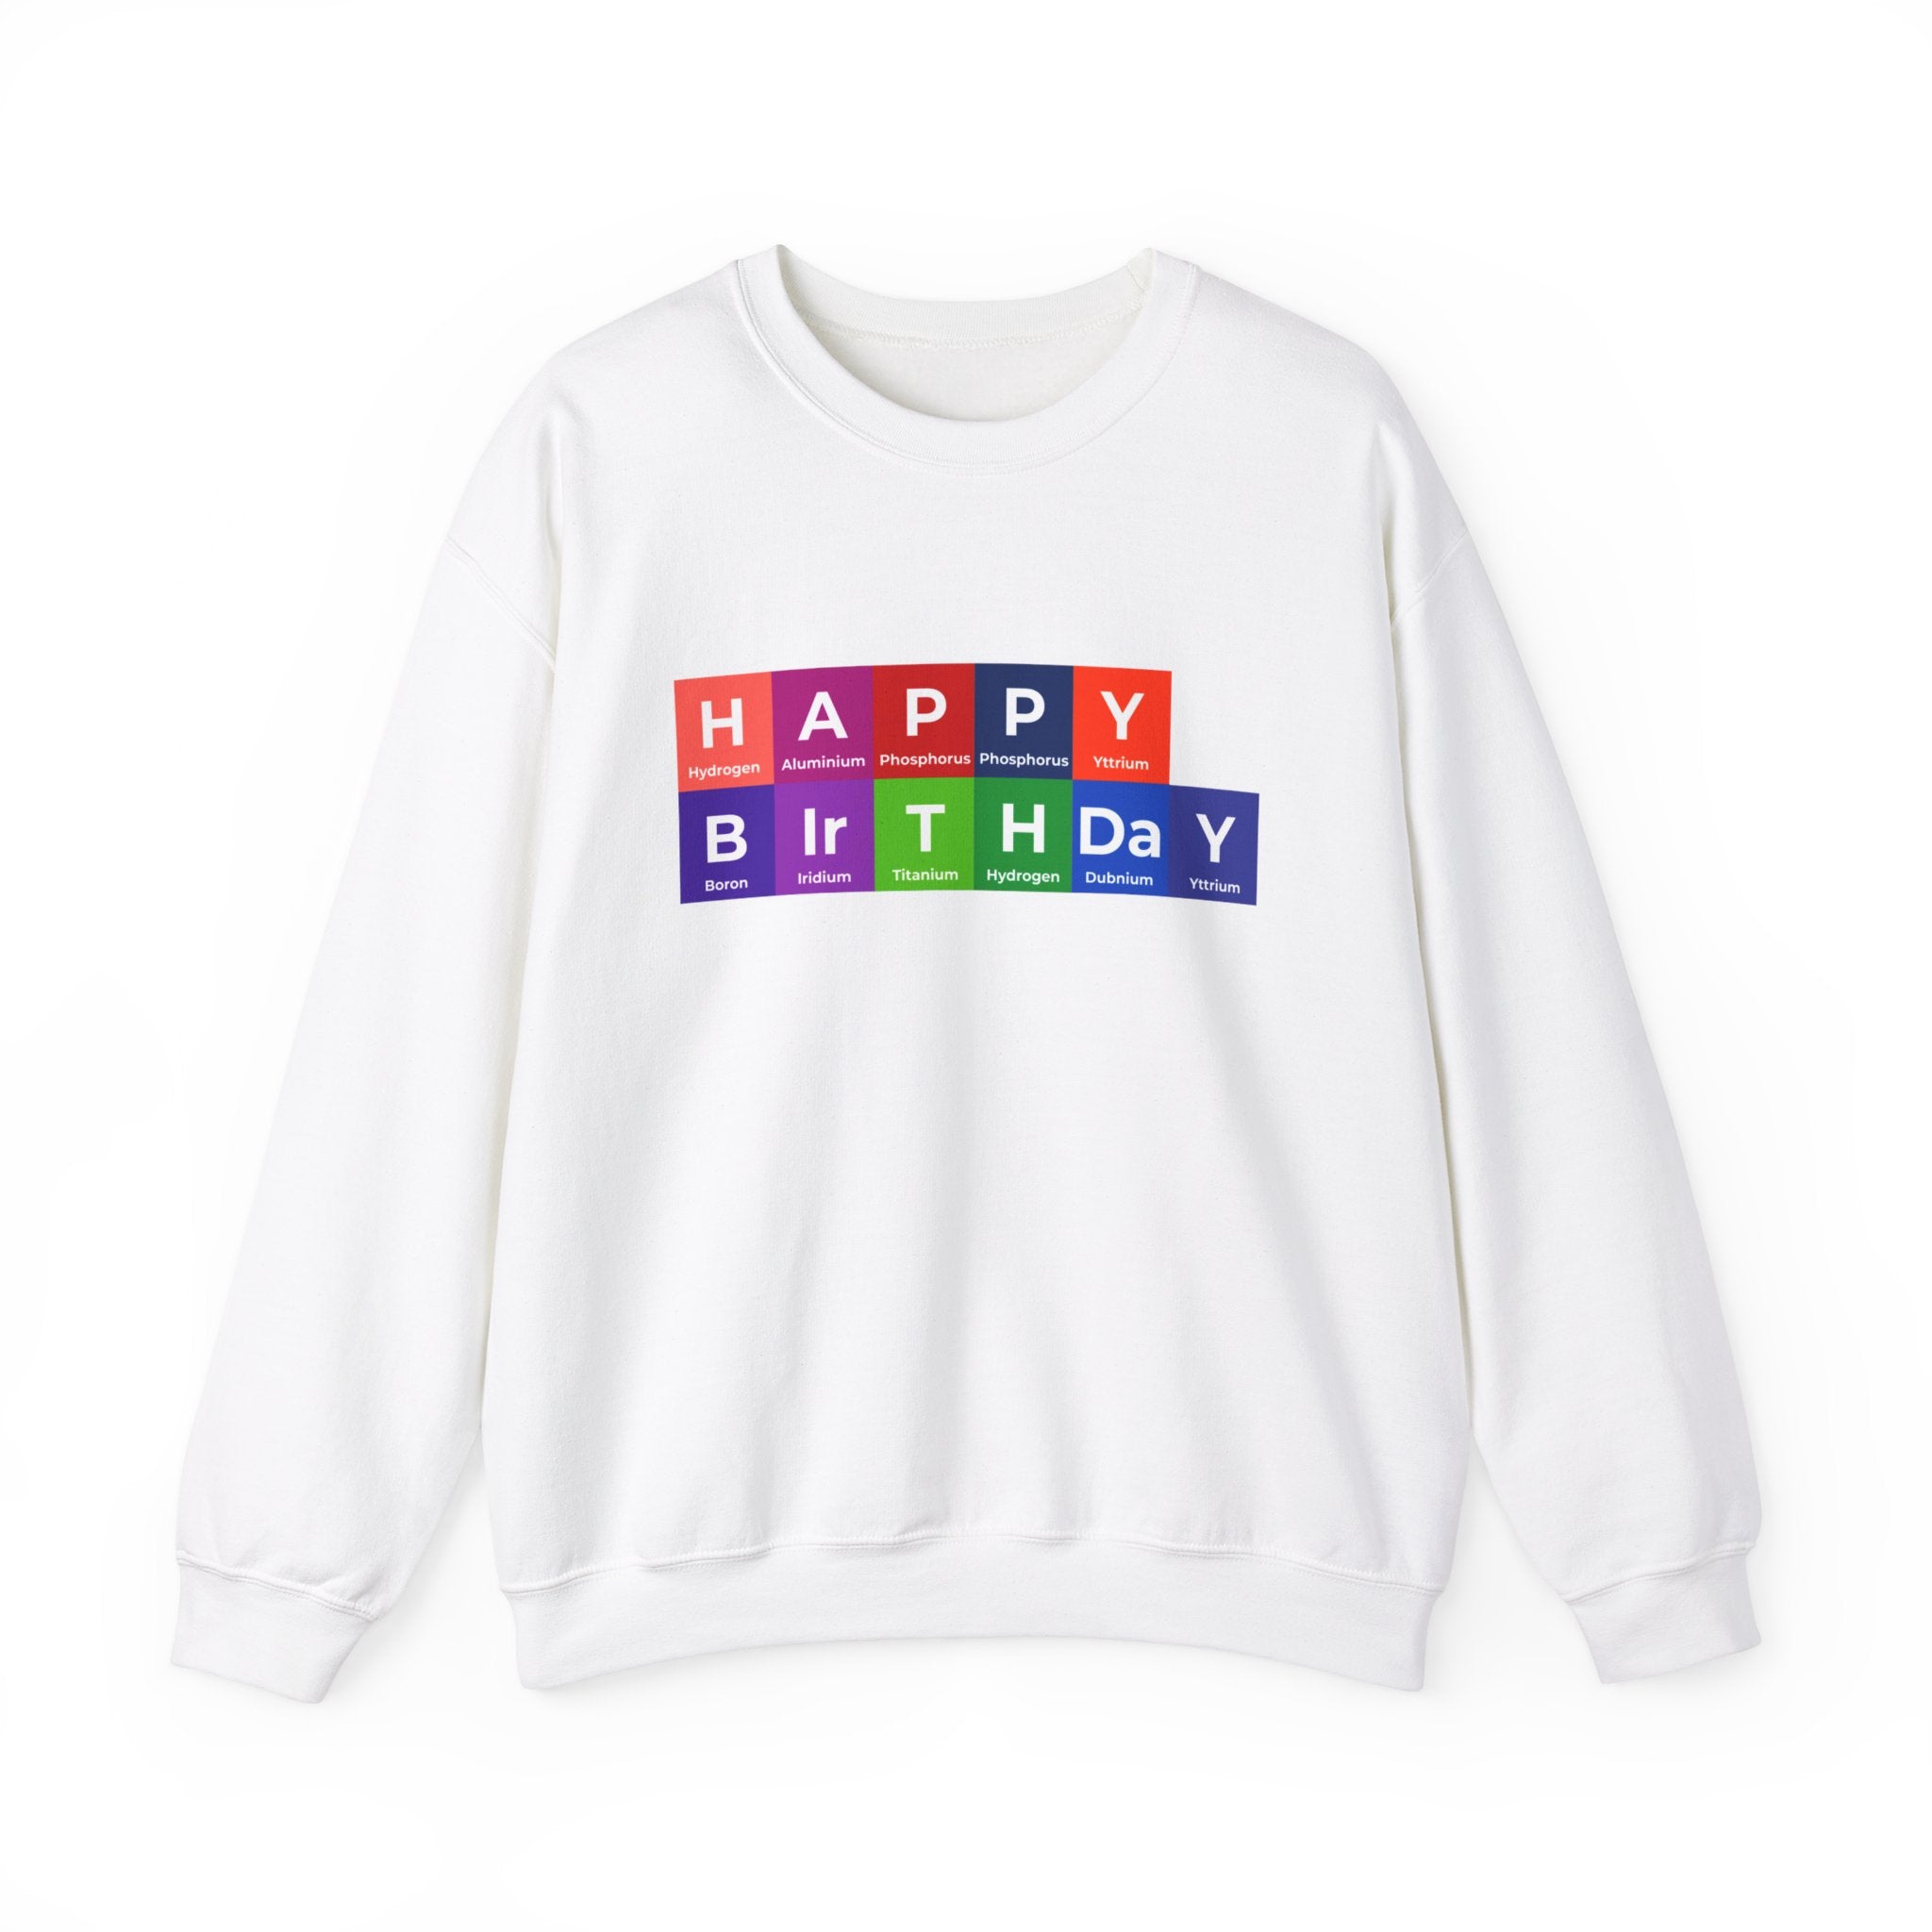 A cozy white Happy Birthday - Sweatshirt with a design that spells out "Happy Birthday" using colorful blocks representing elements from the periodic table, adding a touch of birthday warmth.